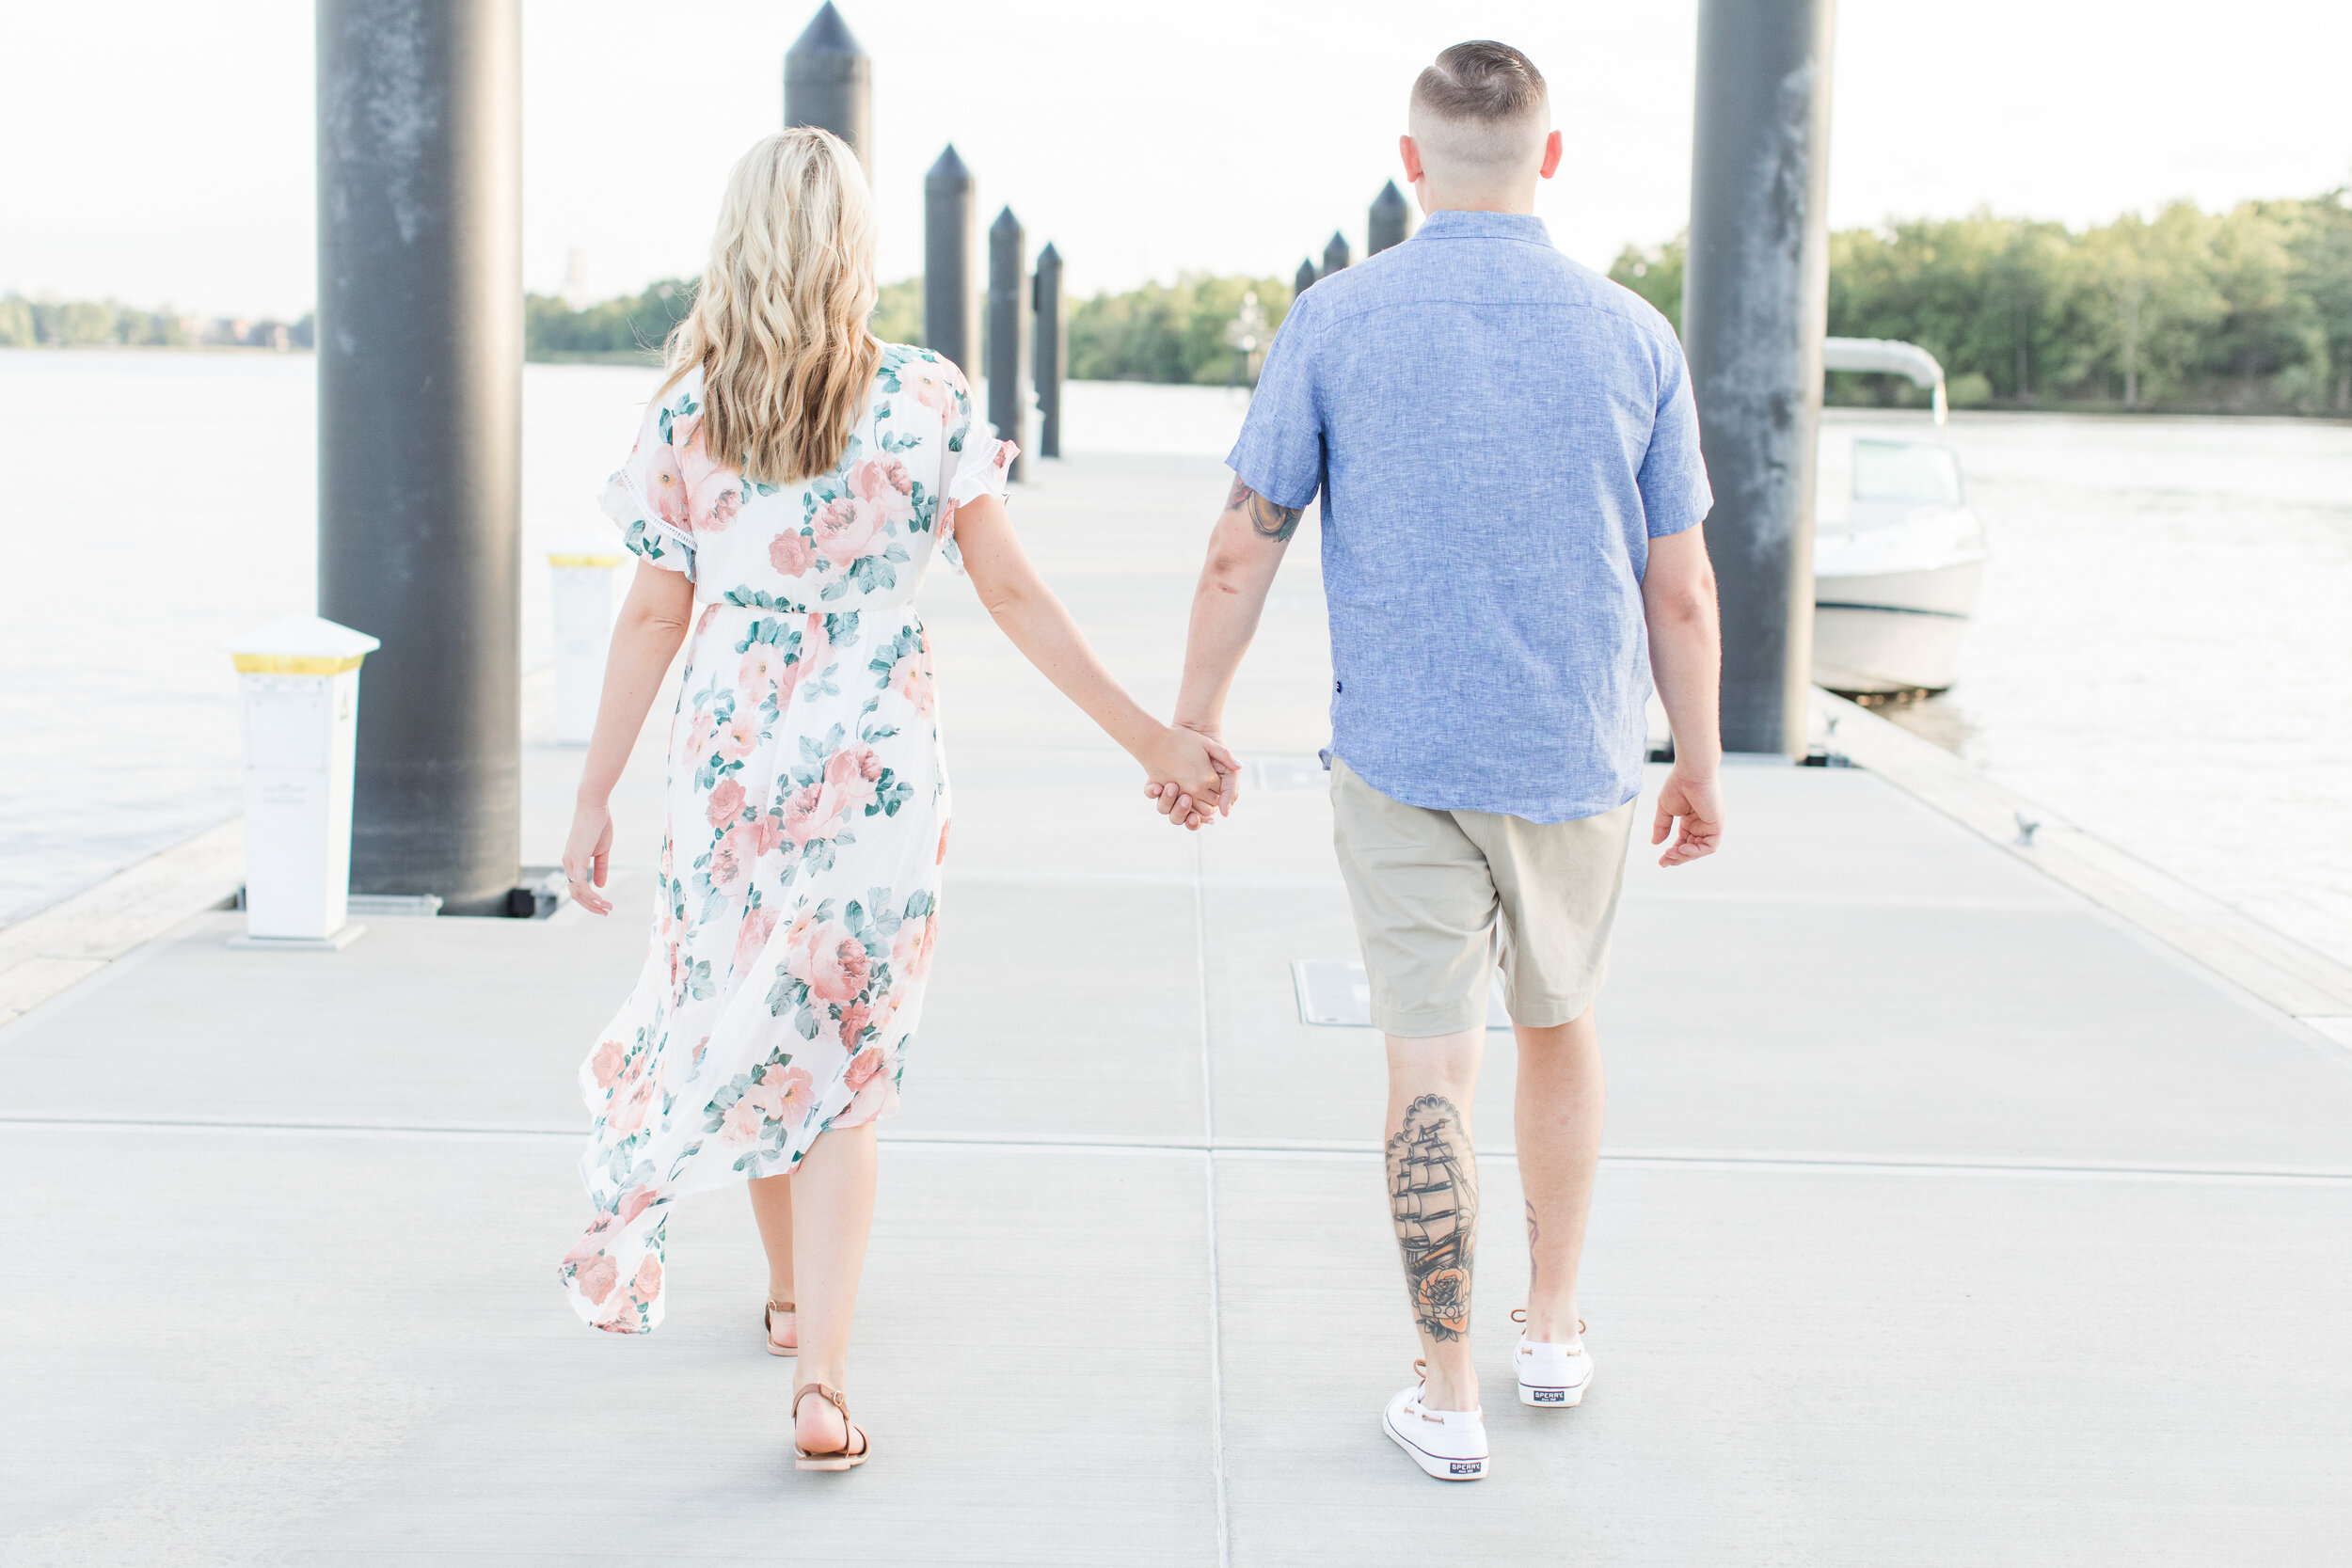 Located just outside of Philadelphia, Bristol Waterfront Park was the perfect location for Brittany and Tom’s Engagement session photographed by Kelly Pullman photography.